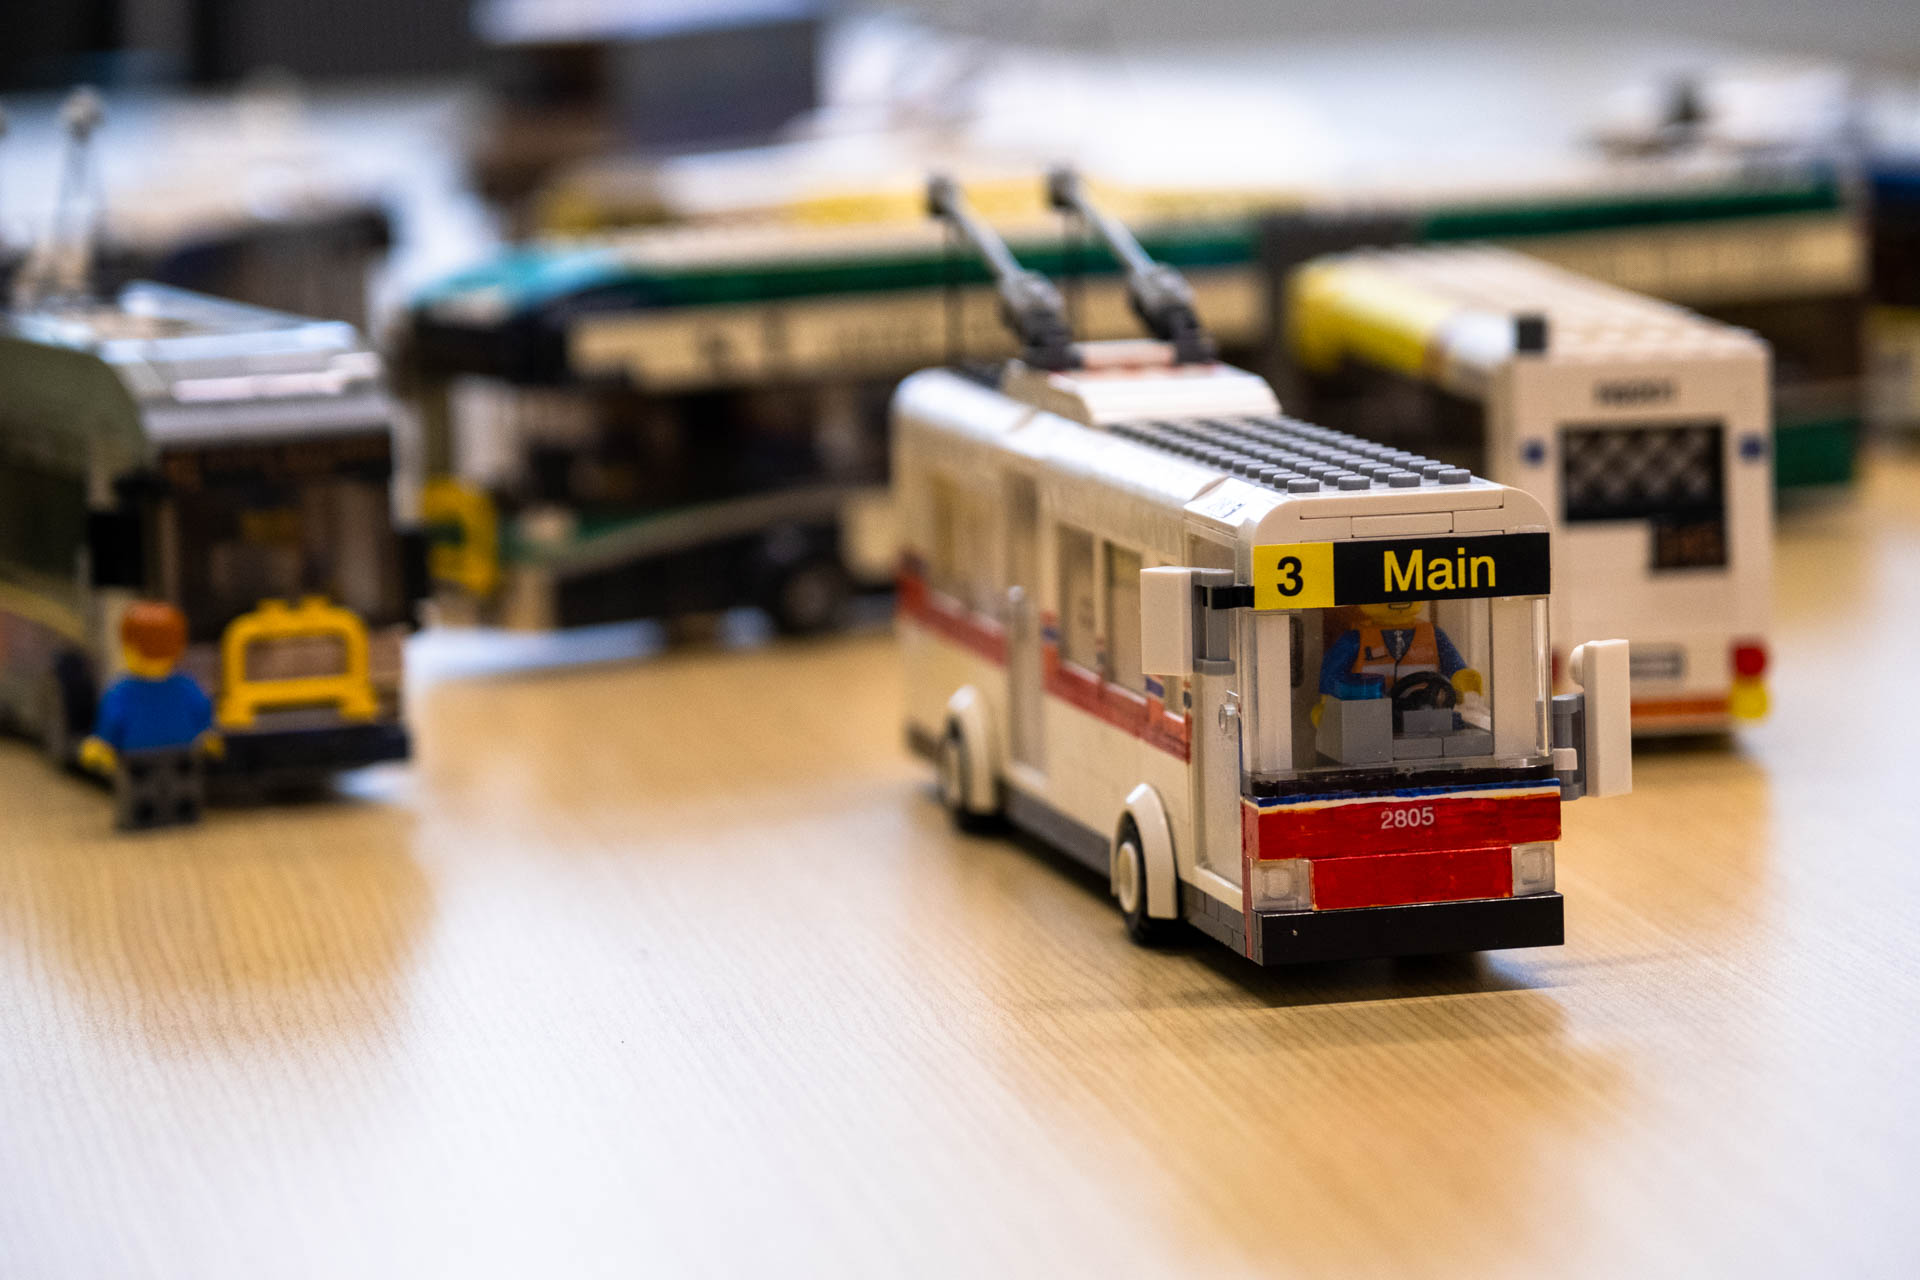 Buses built using LEGO